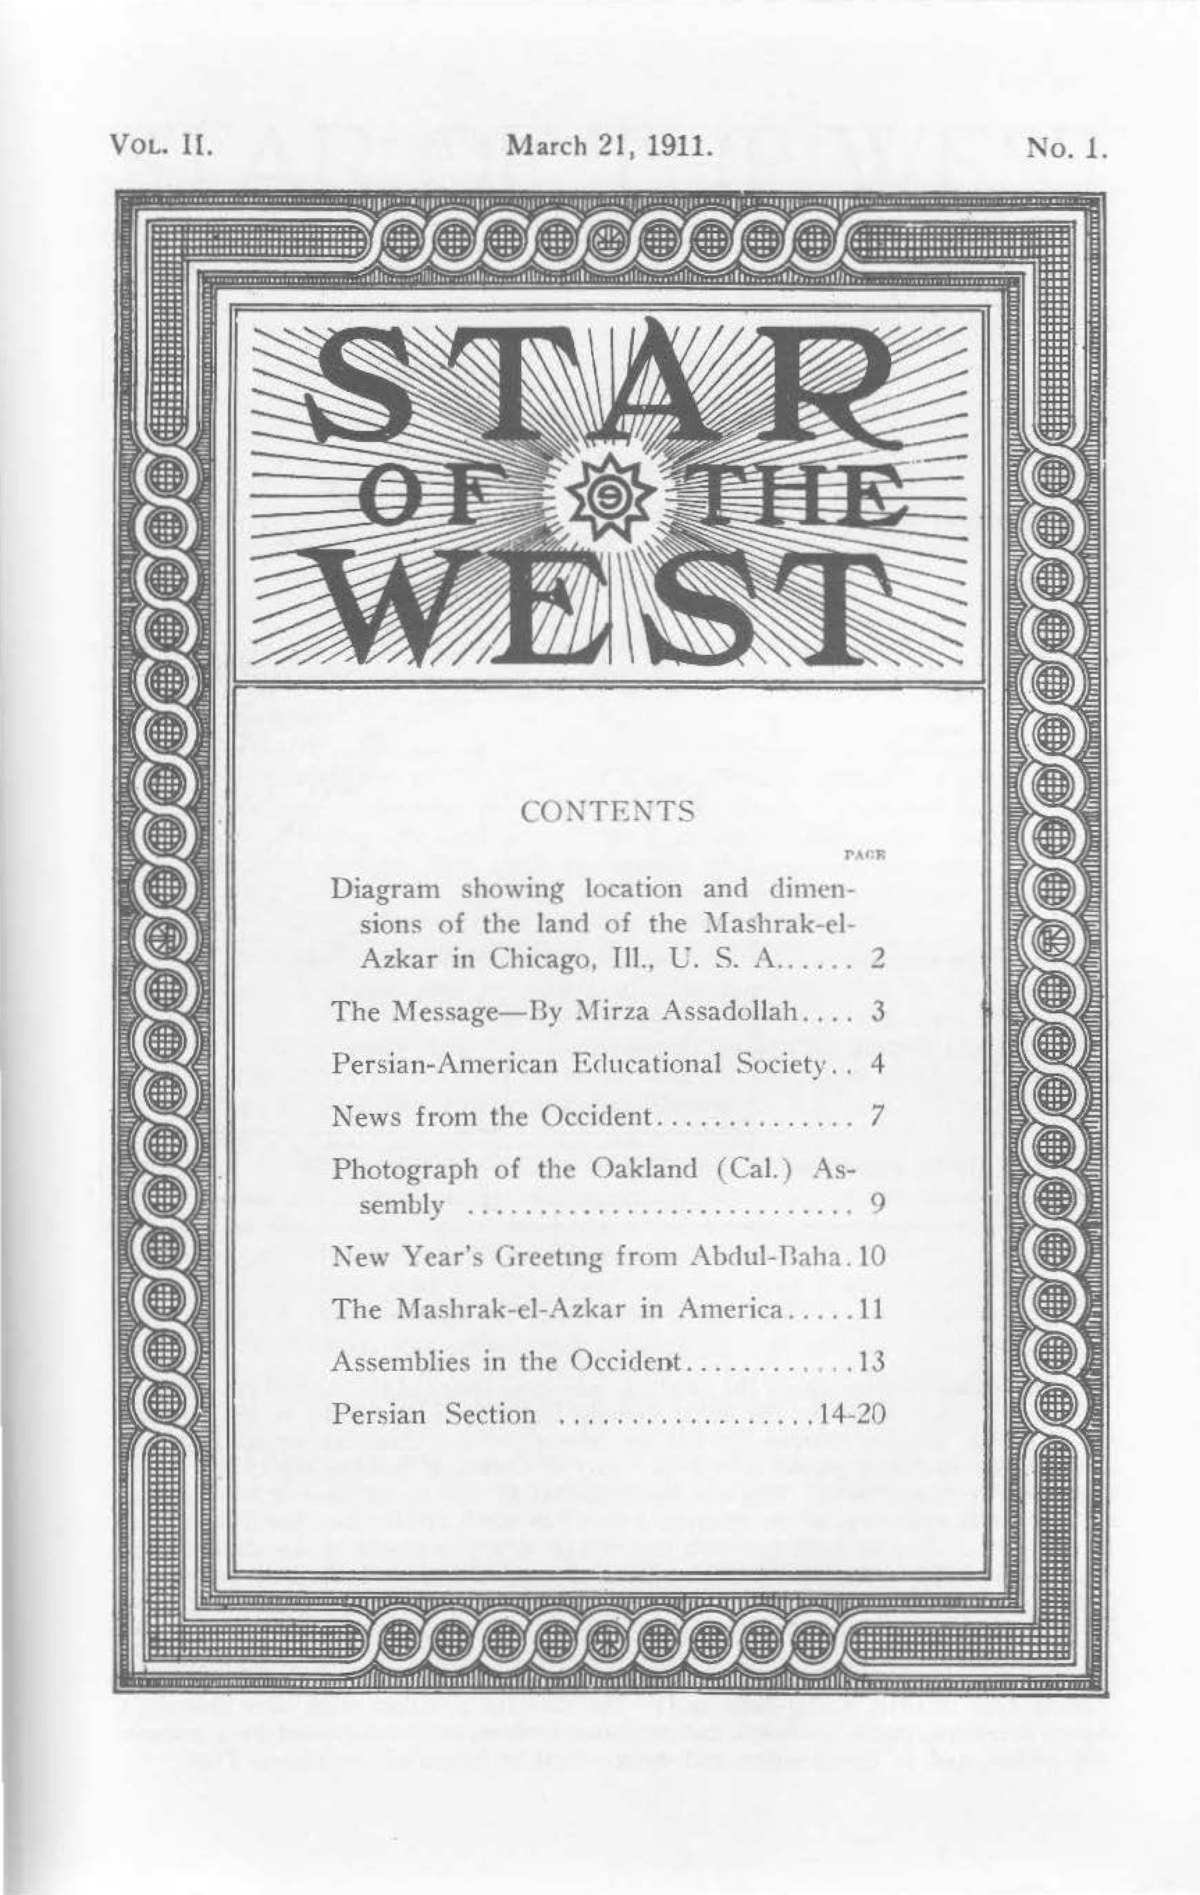 The cover of the second volume of Star of the West